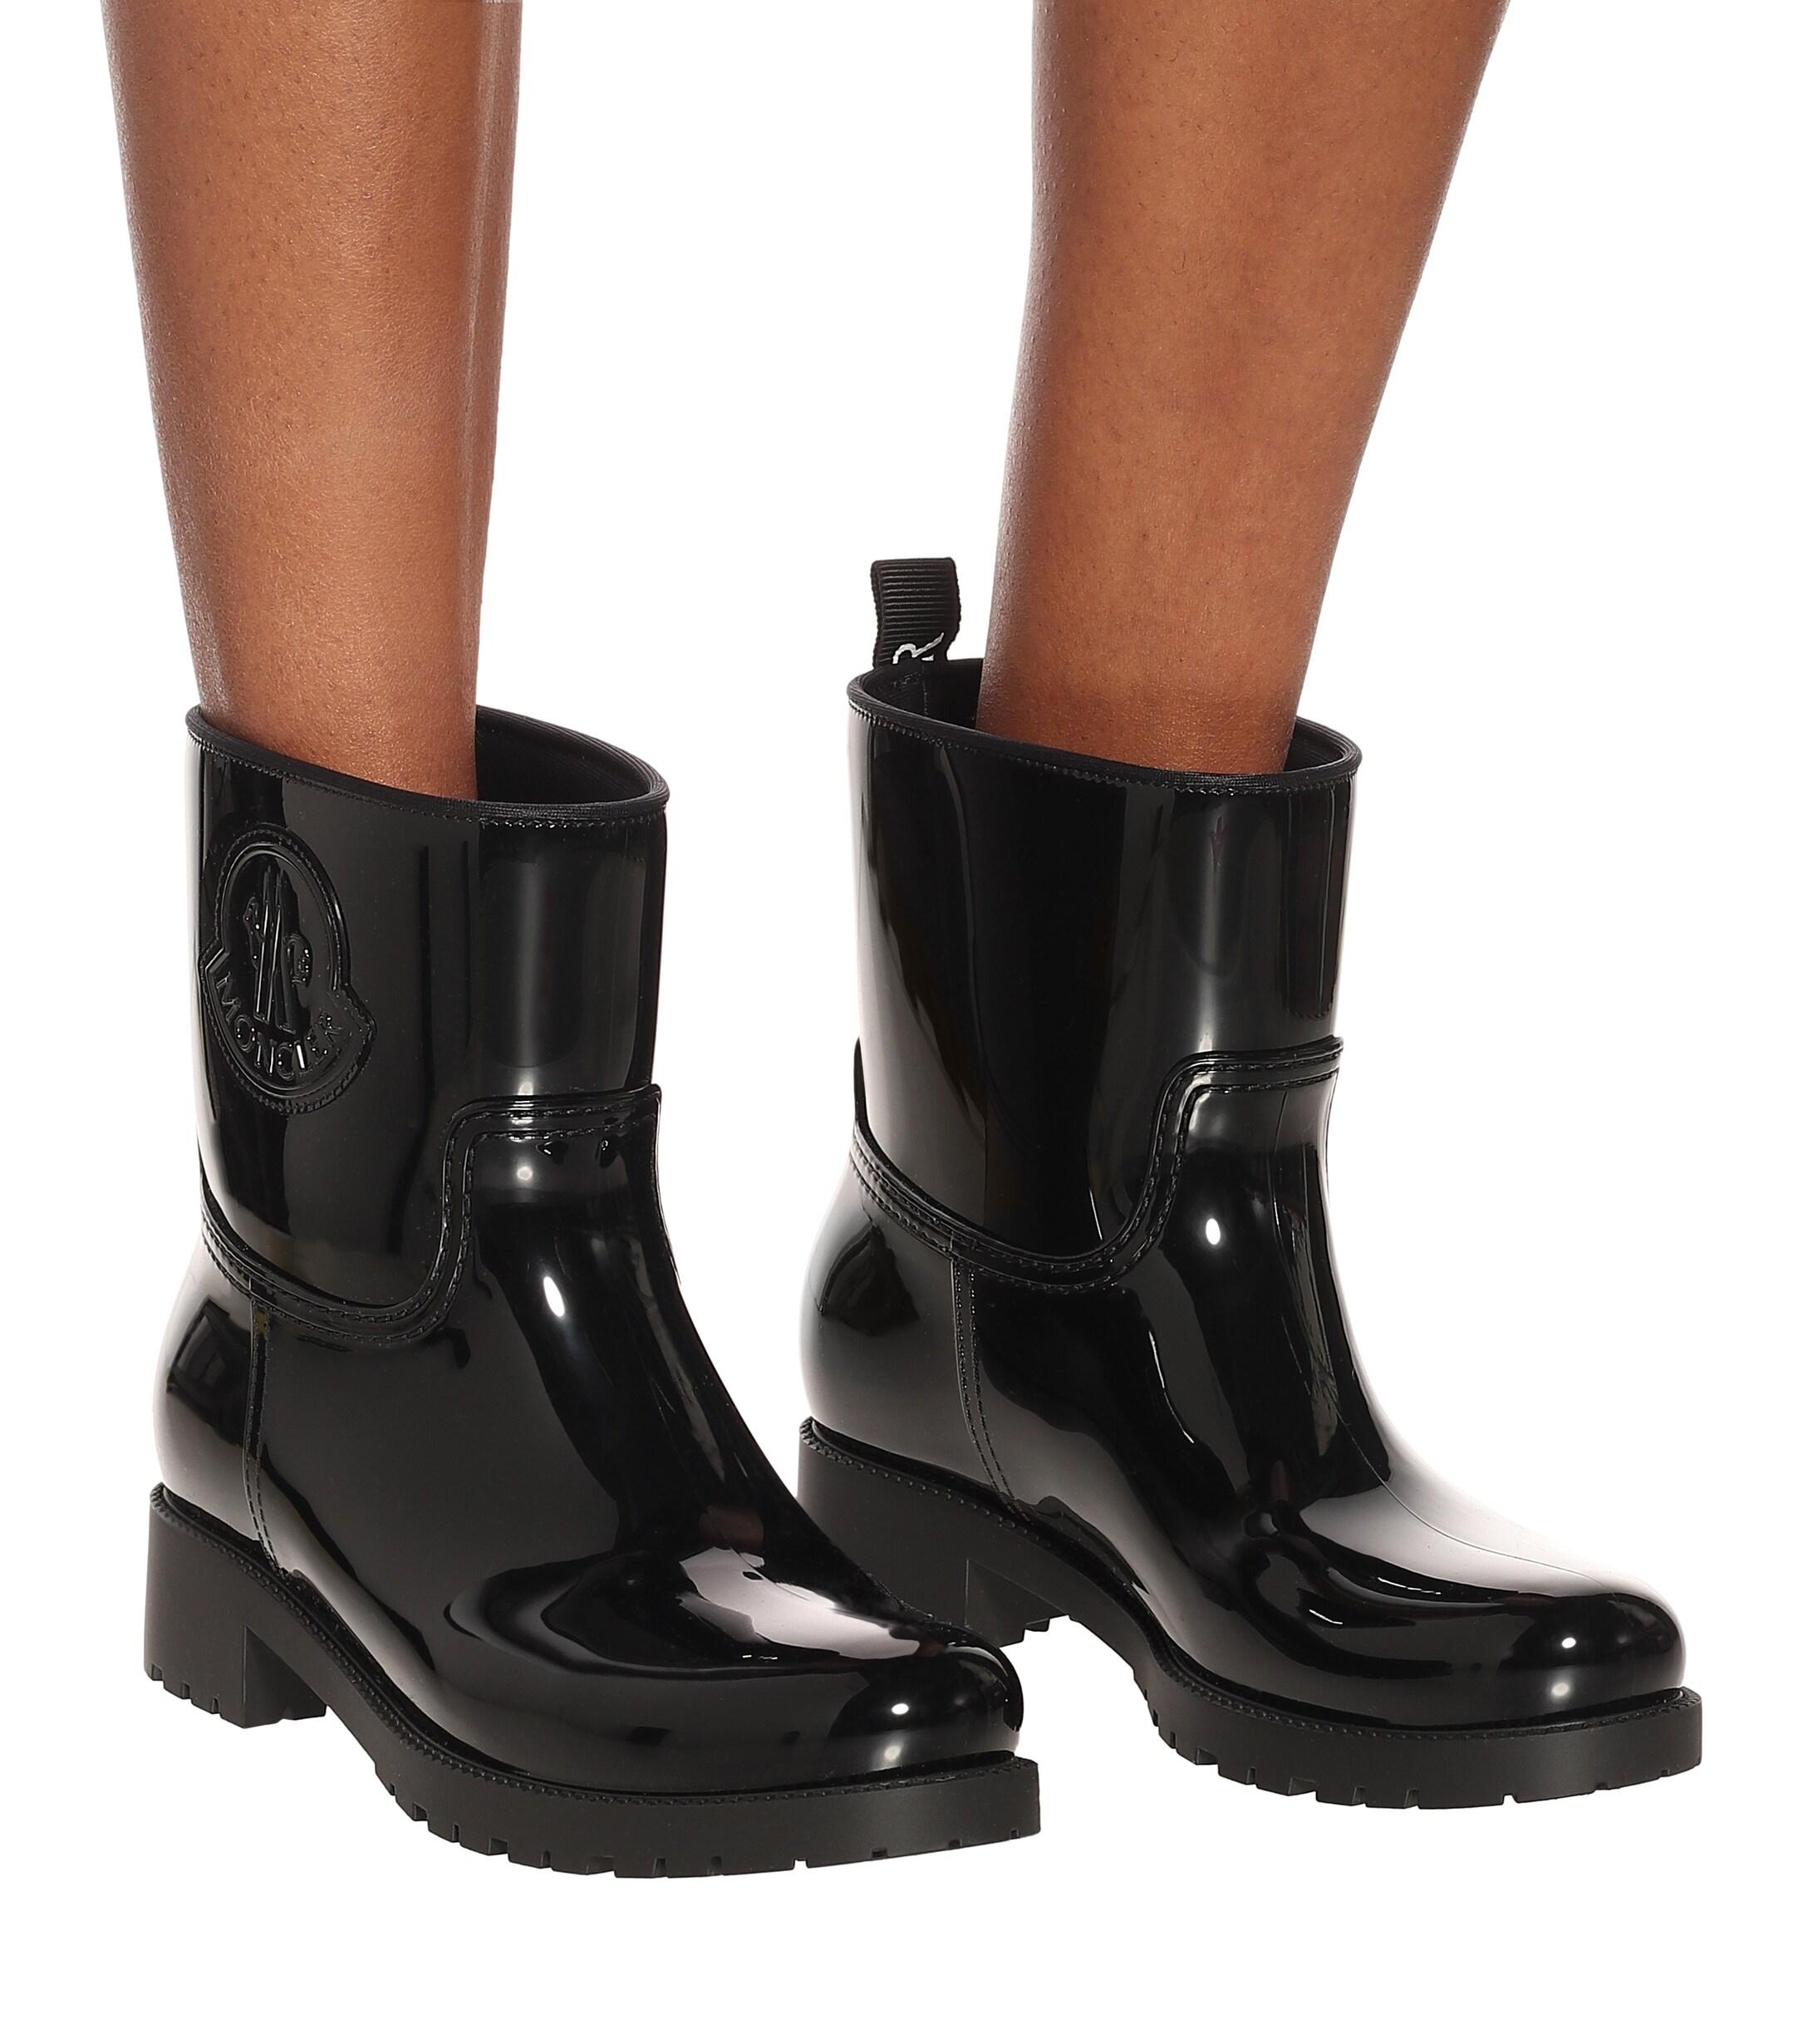 Moncler Ginette Stivale Rain Boots in Black - Lyst